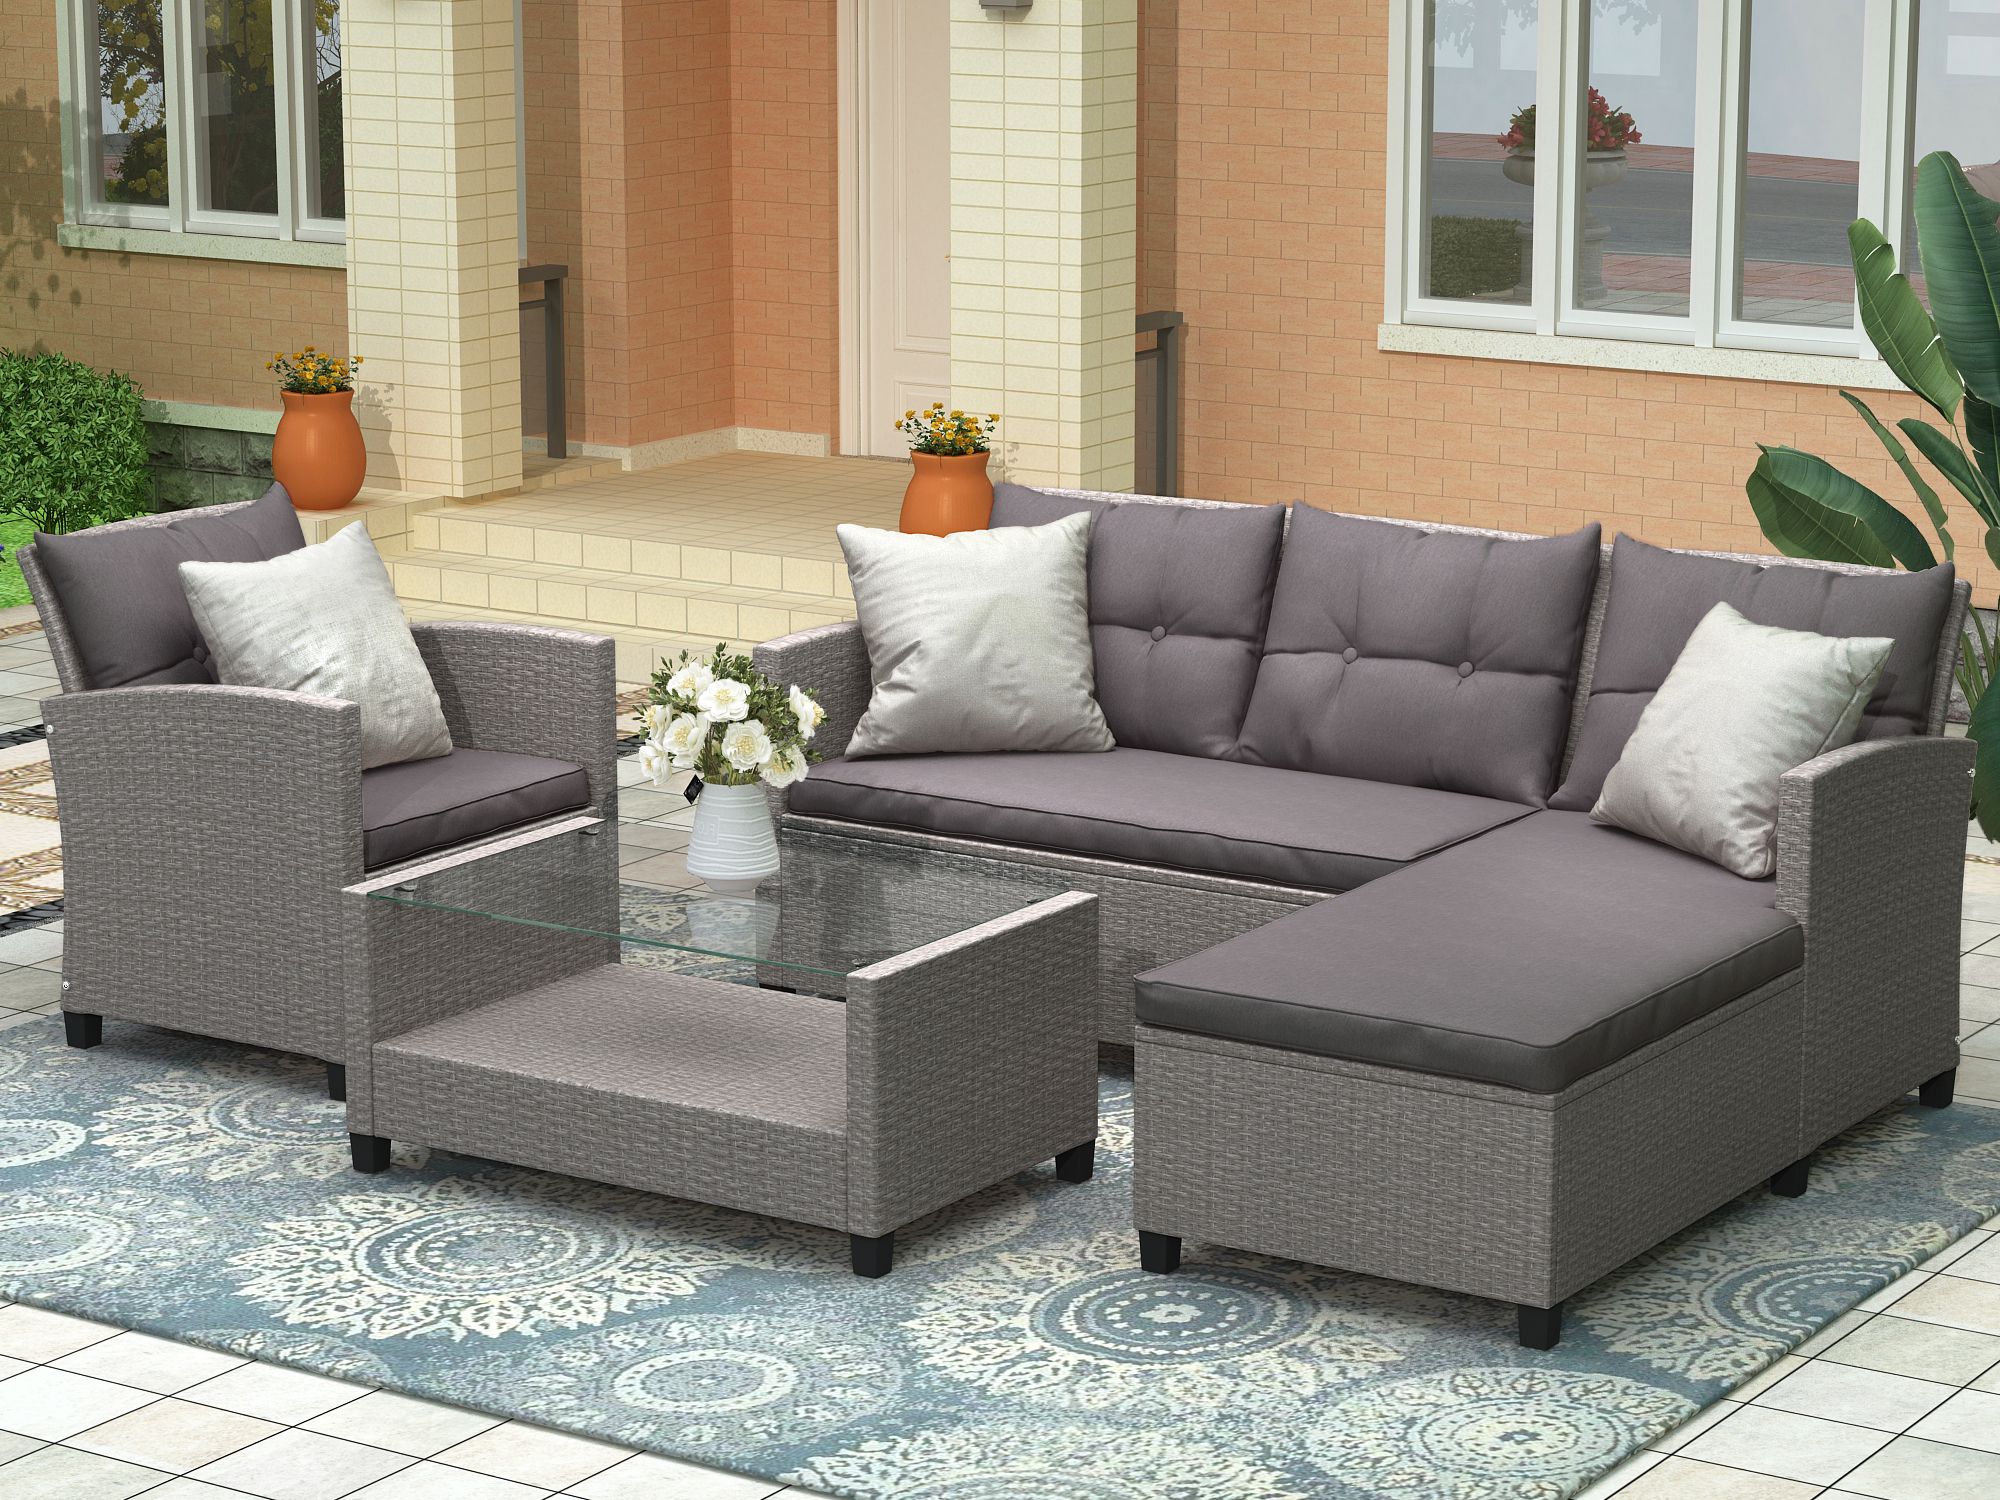 Recent Gray Wood Outdoor Conversation Sets Regarding Outdoor Sectional Conversation Set, 4 Piece Rattan Wicker Sectional (View 11 of 15)